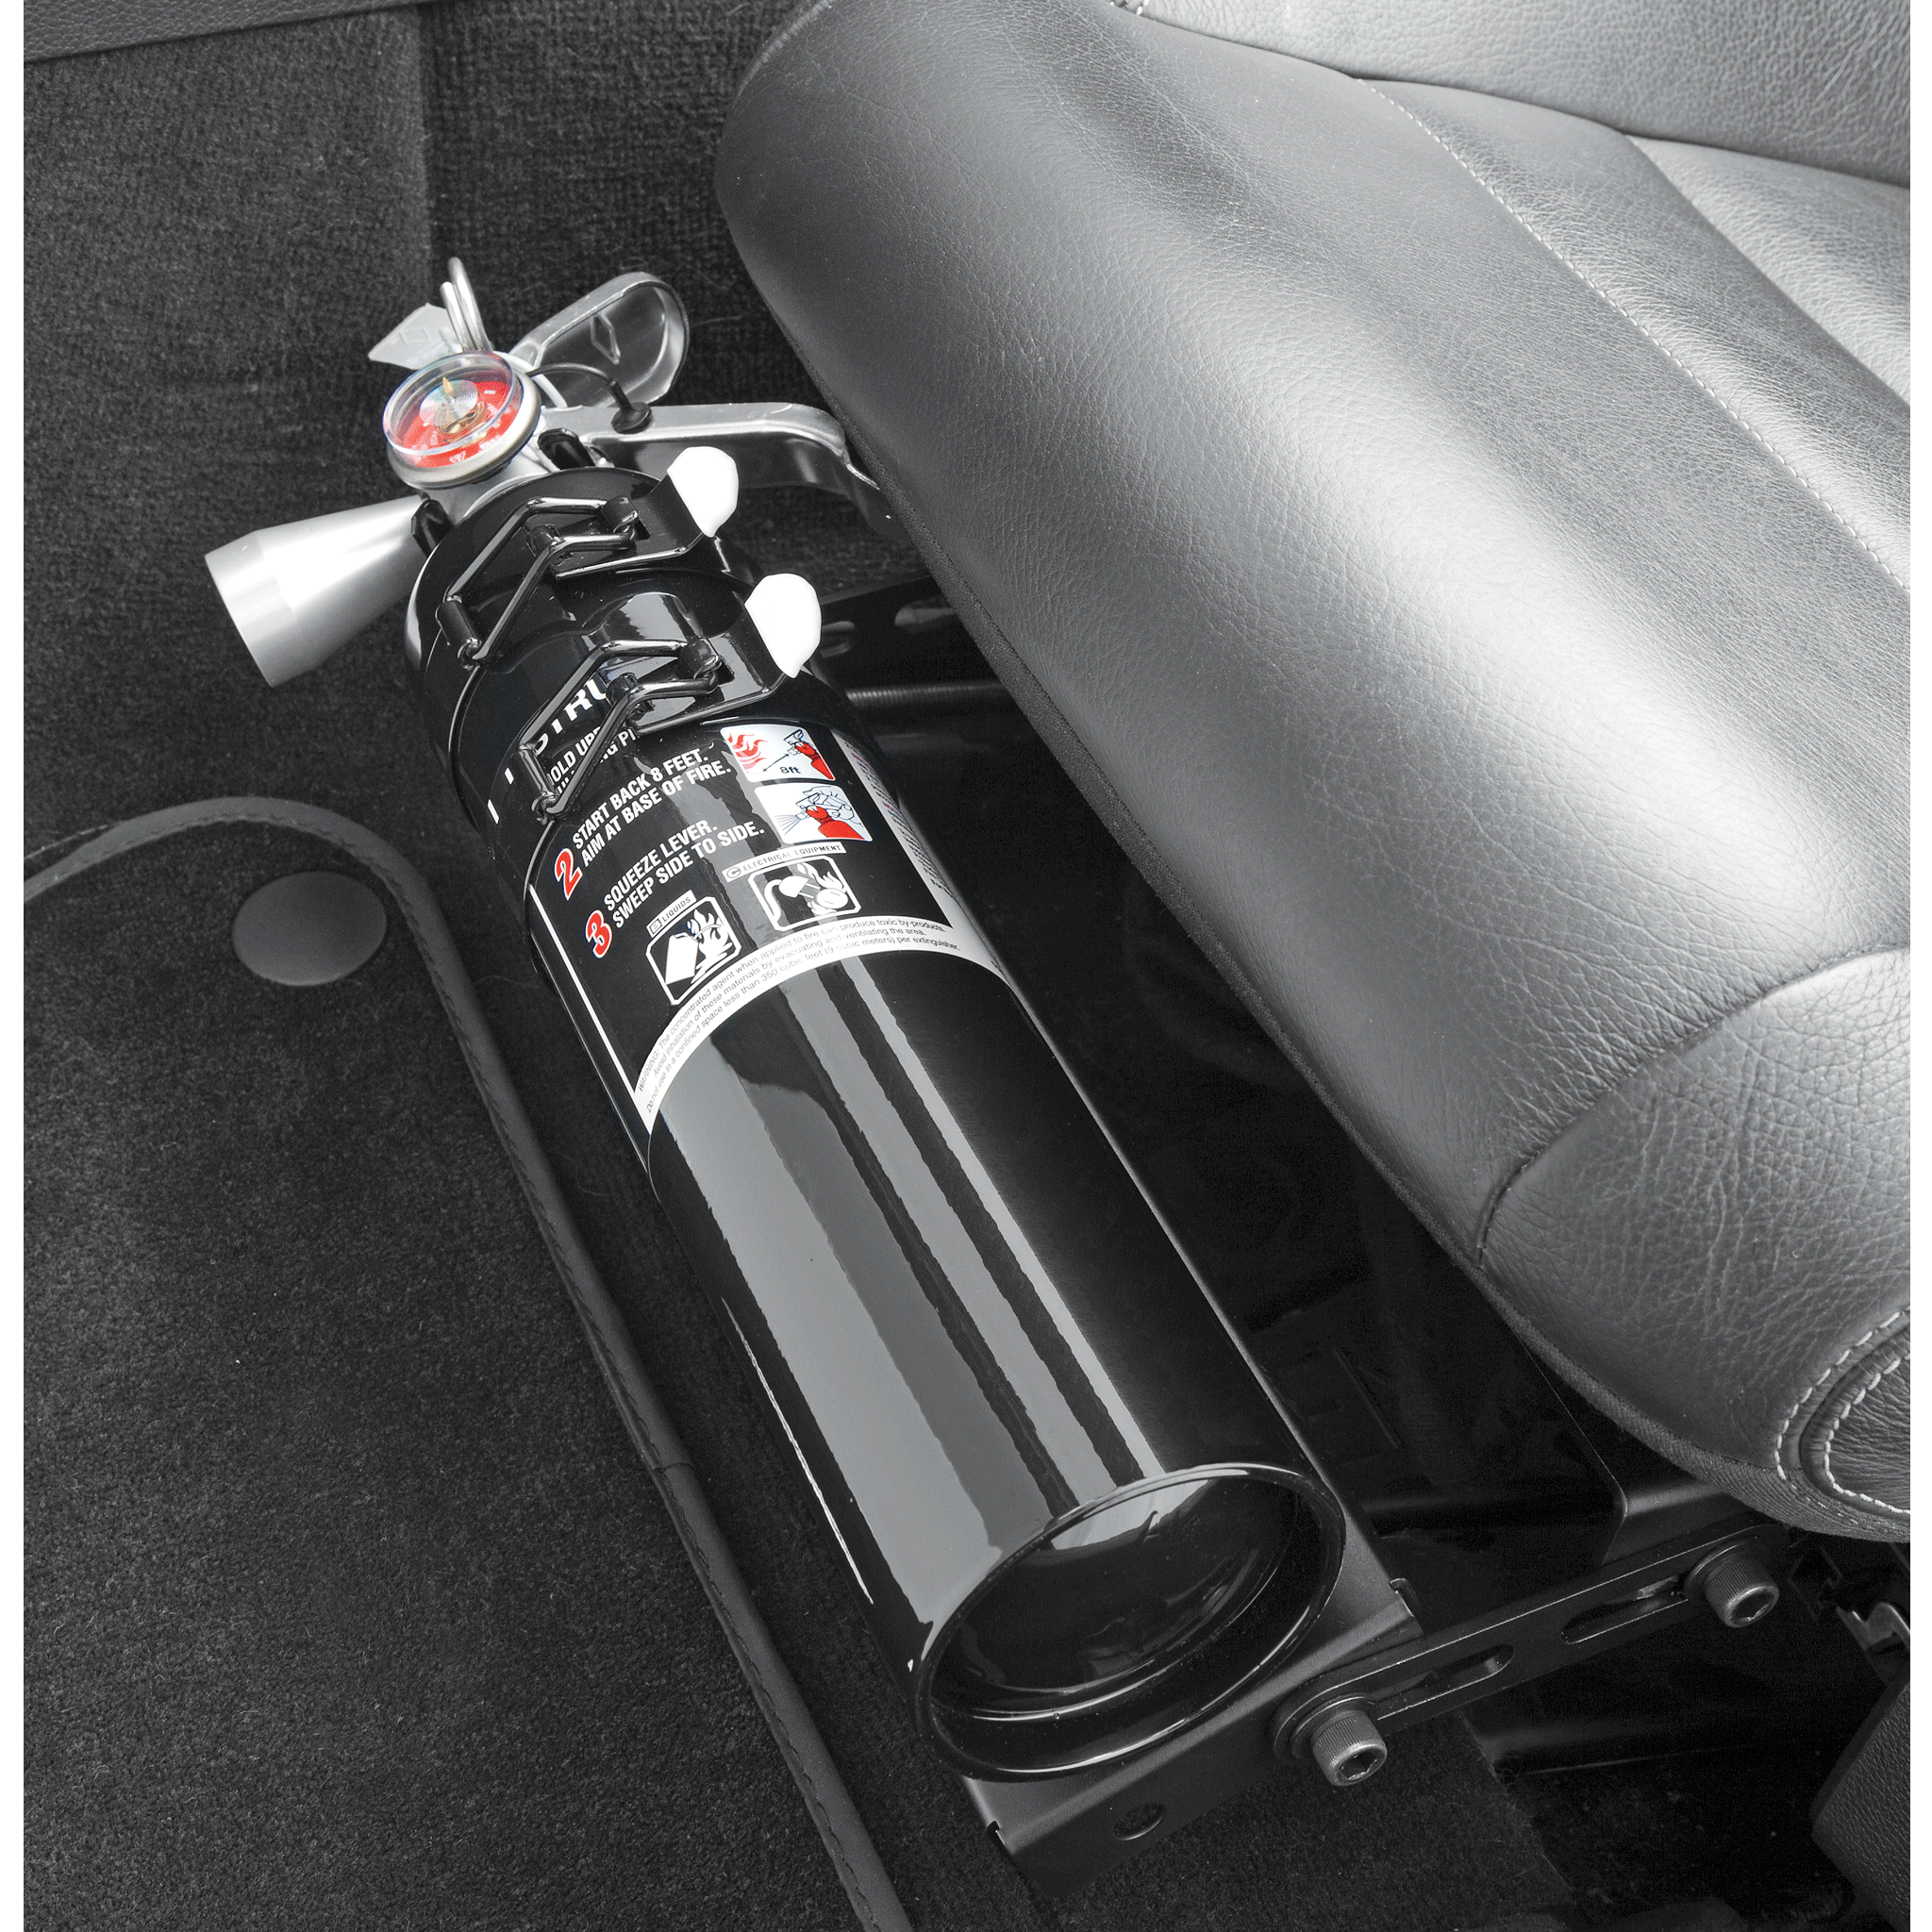 MaxOut Dry Chemical Car Fire Extinguisher - 5.0 lb.